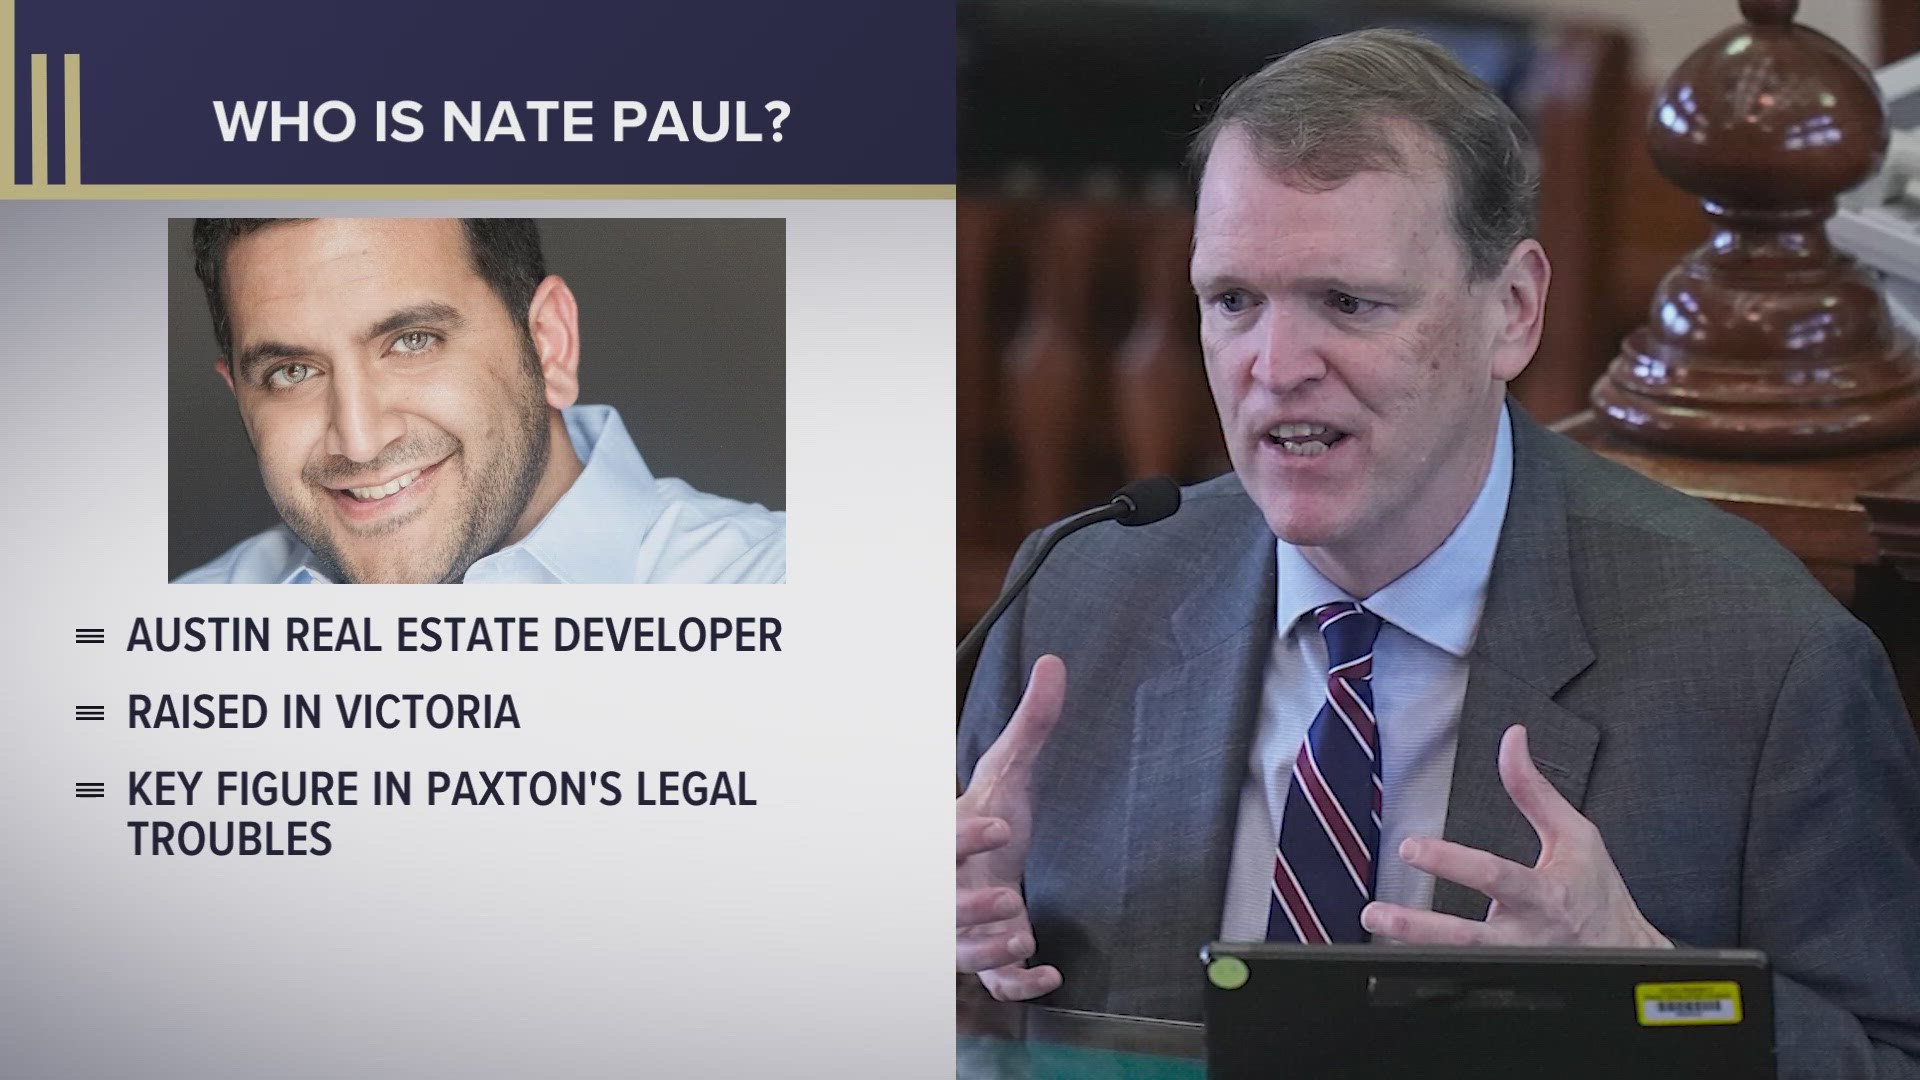 Things got testy at times when Paxton's former top assistant Jeff Mateer testified about the AG's relationship with Nate Paul and why his alleged affair is relevant.